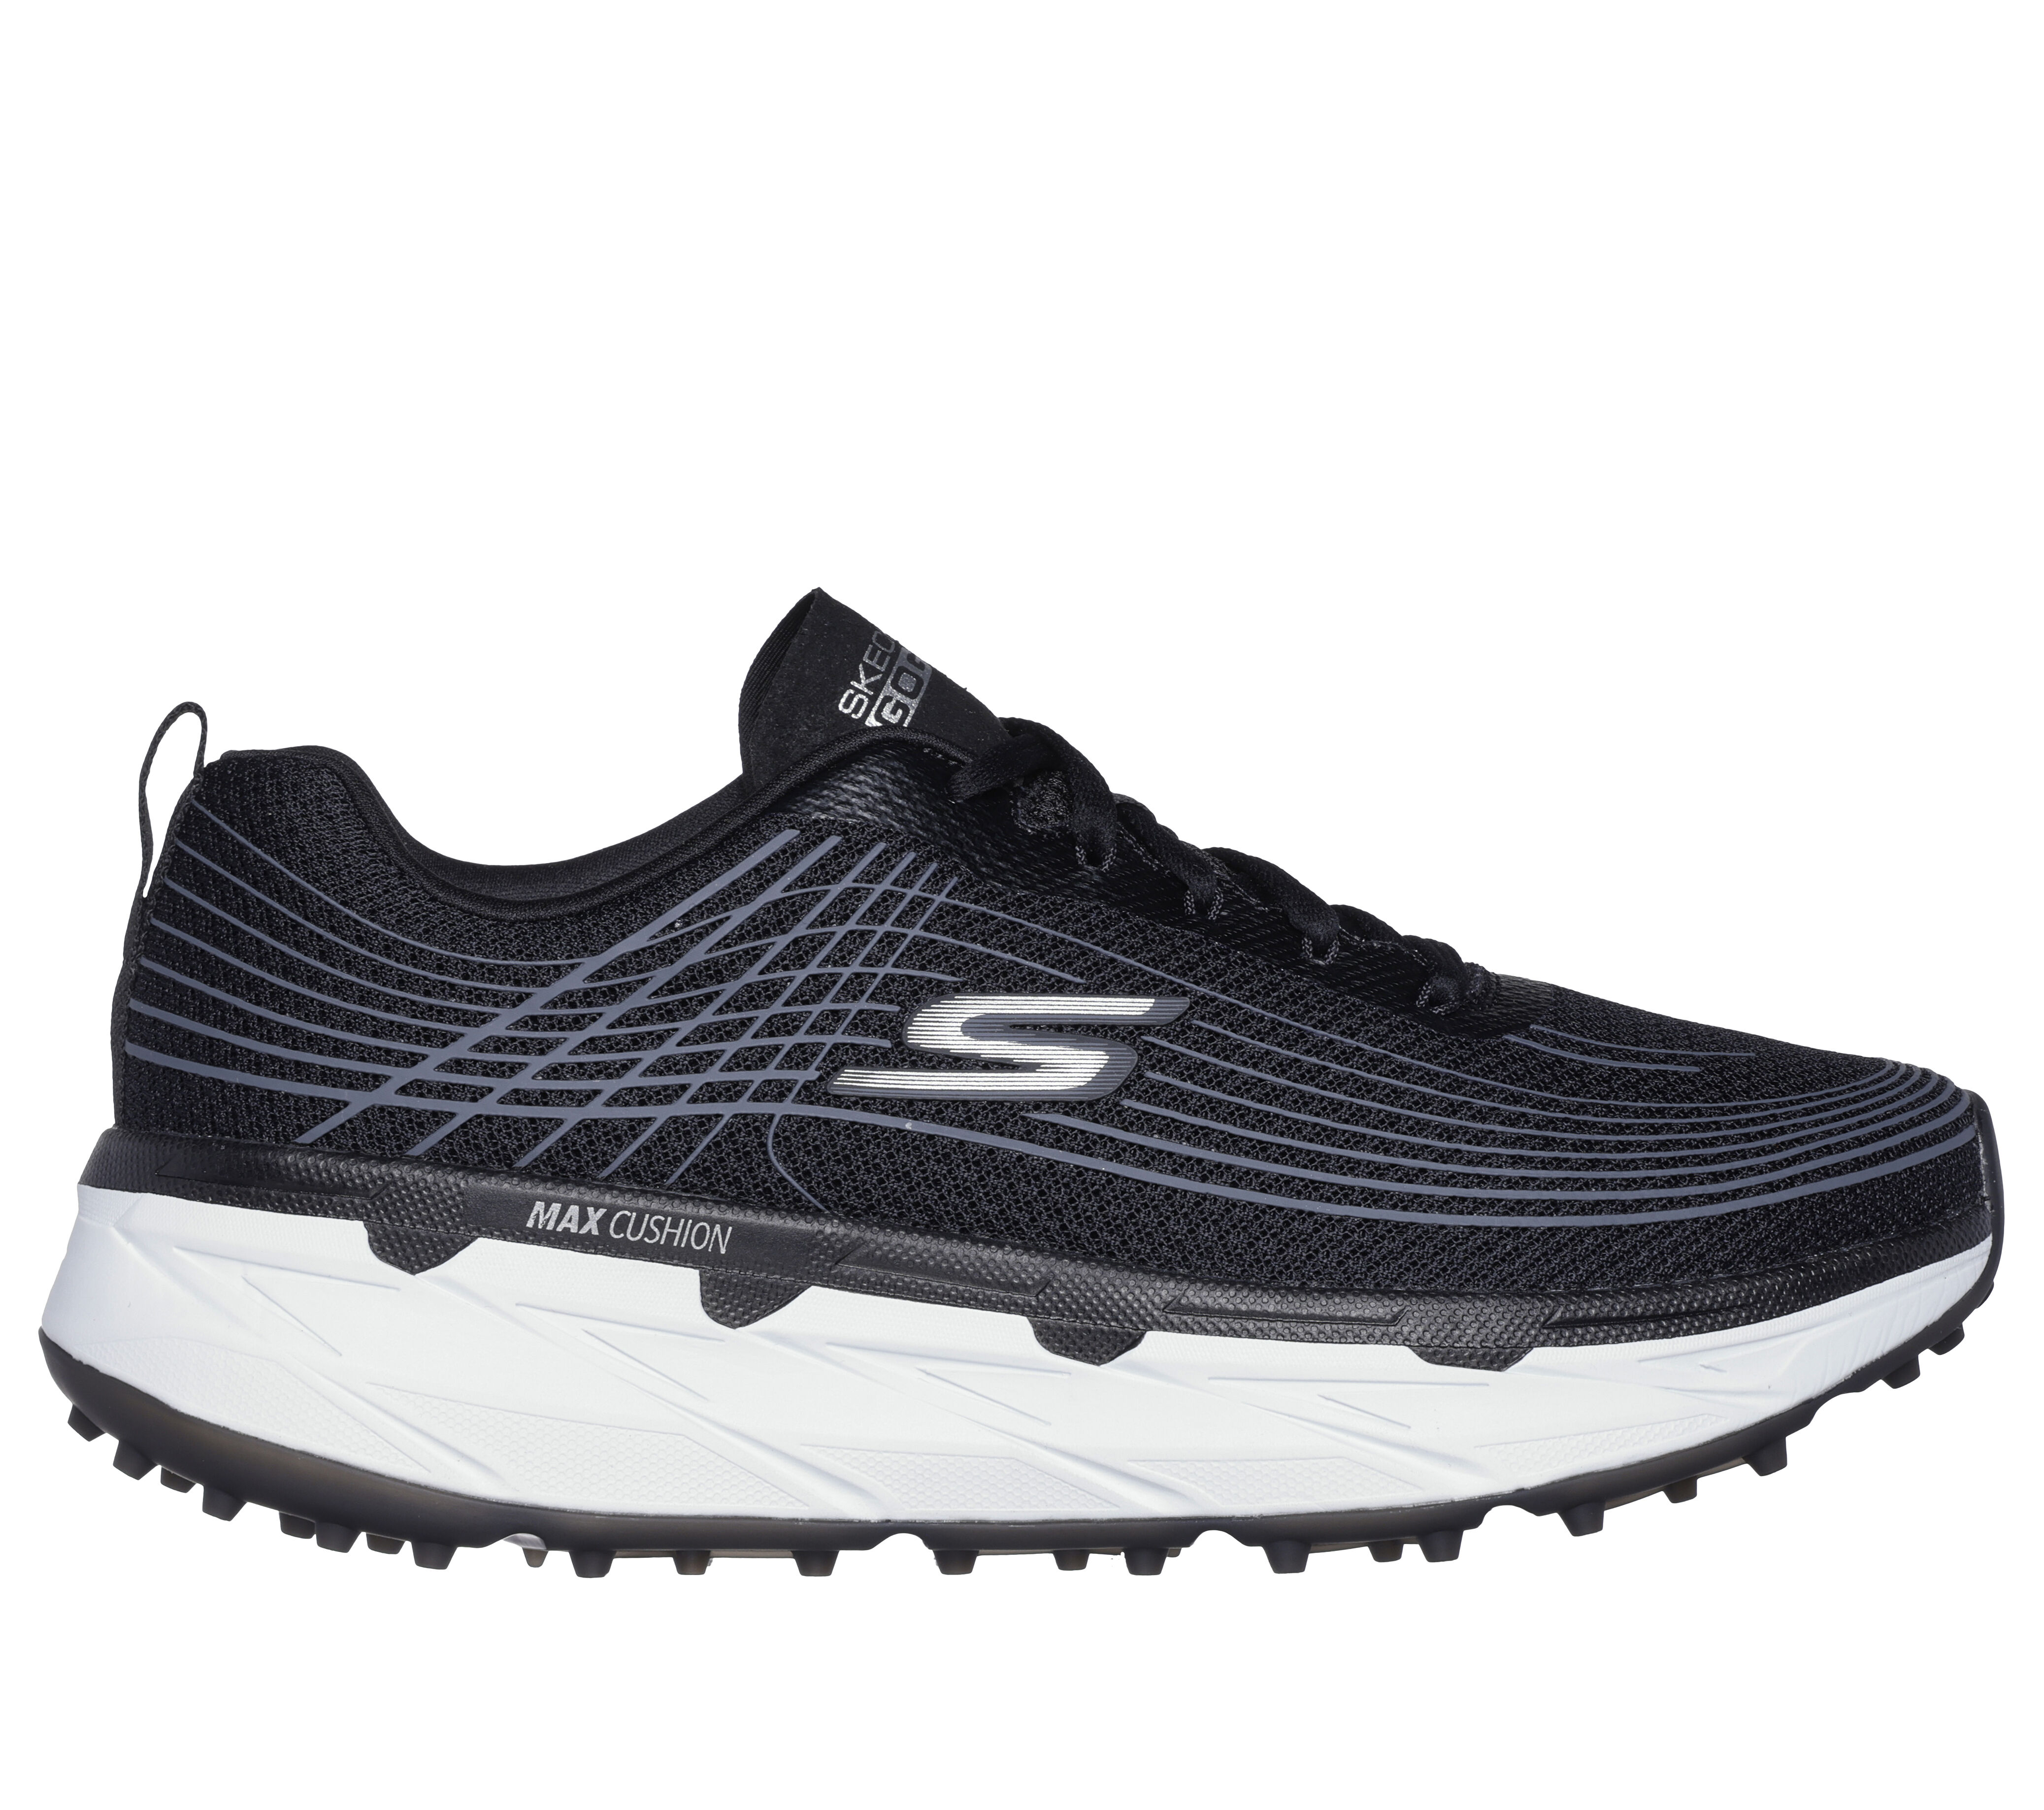 skechers golf shoes india